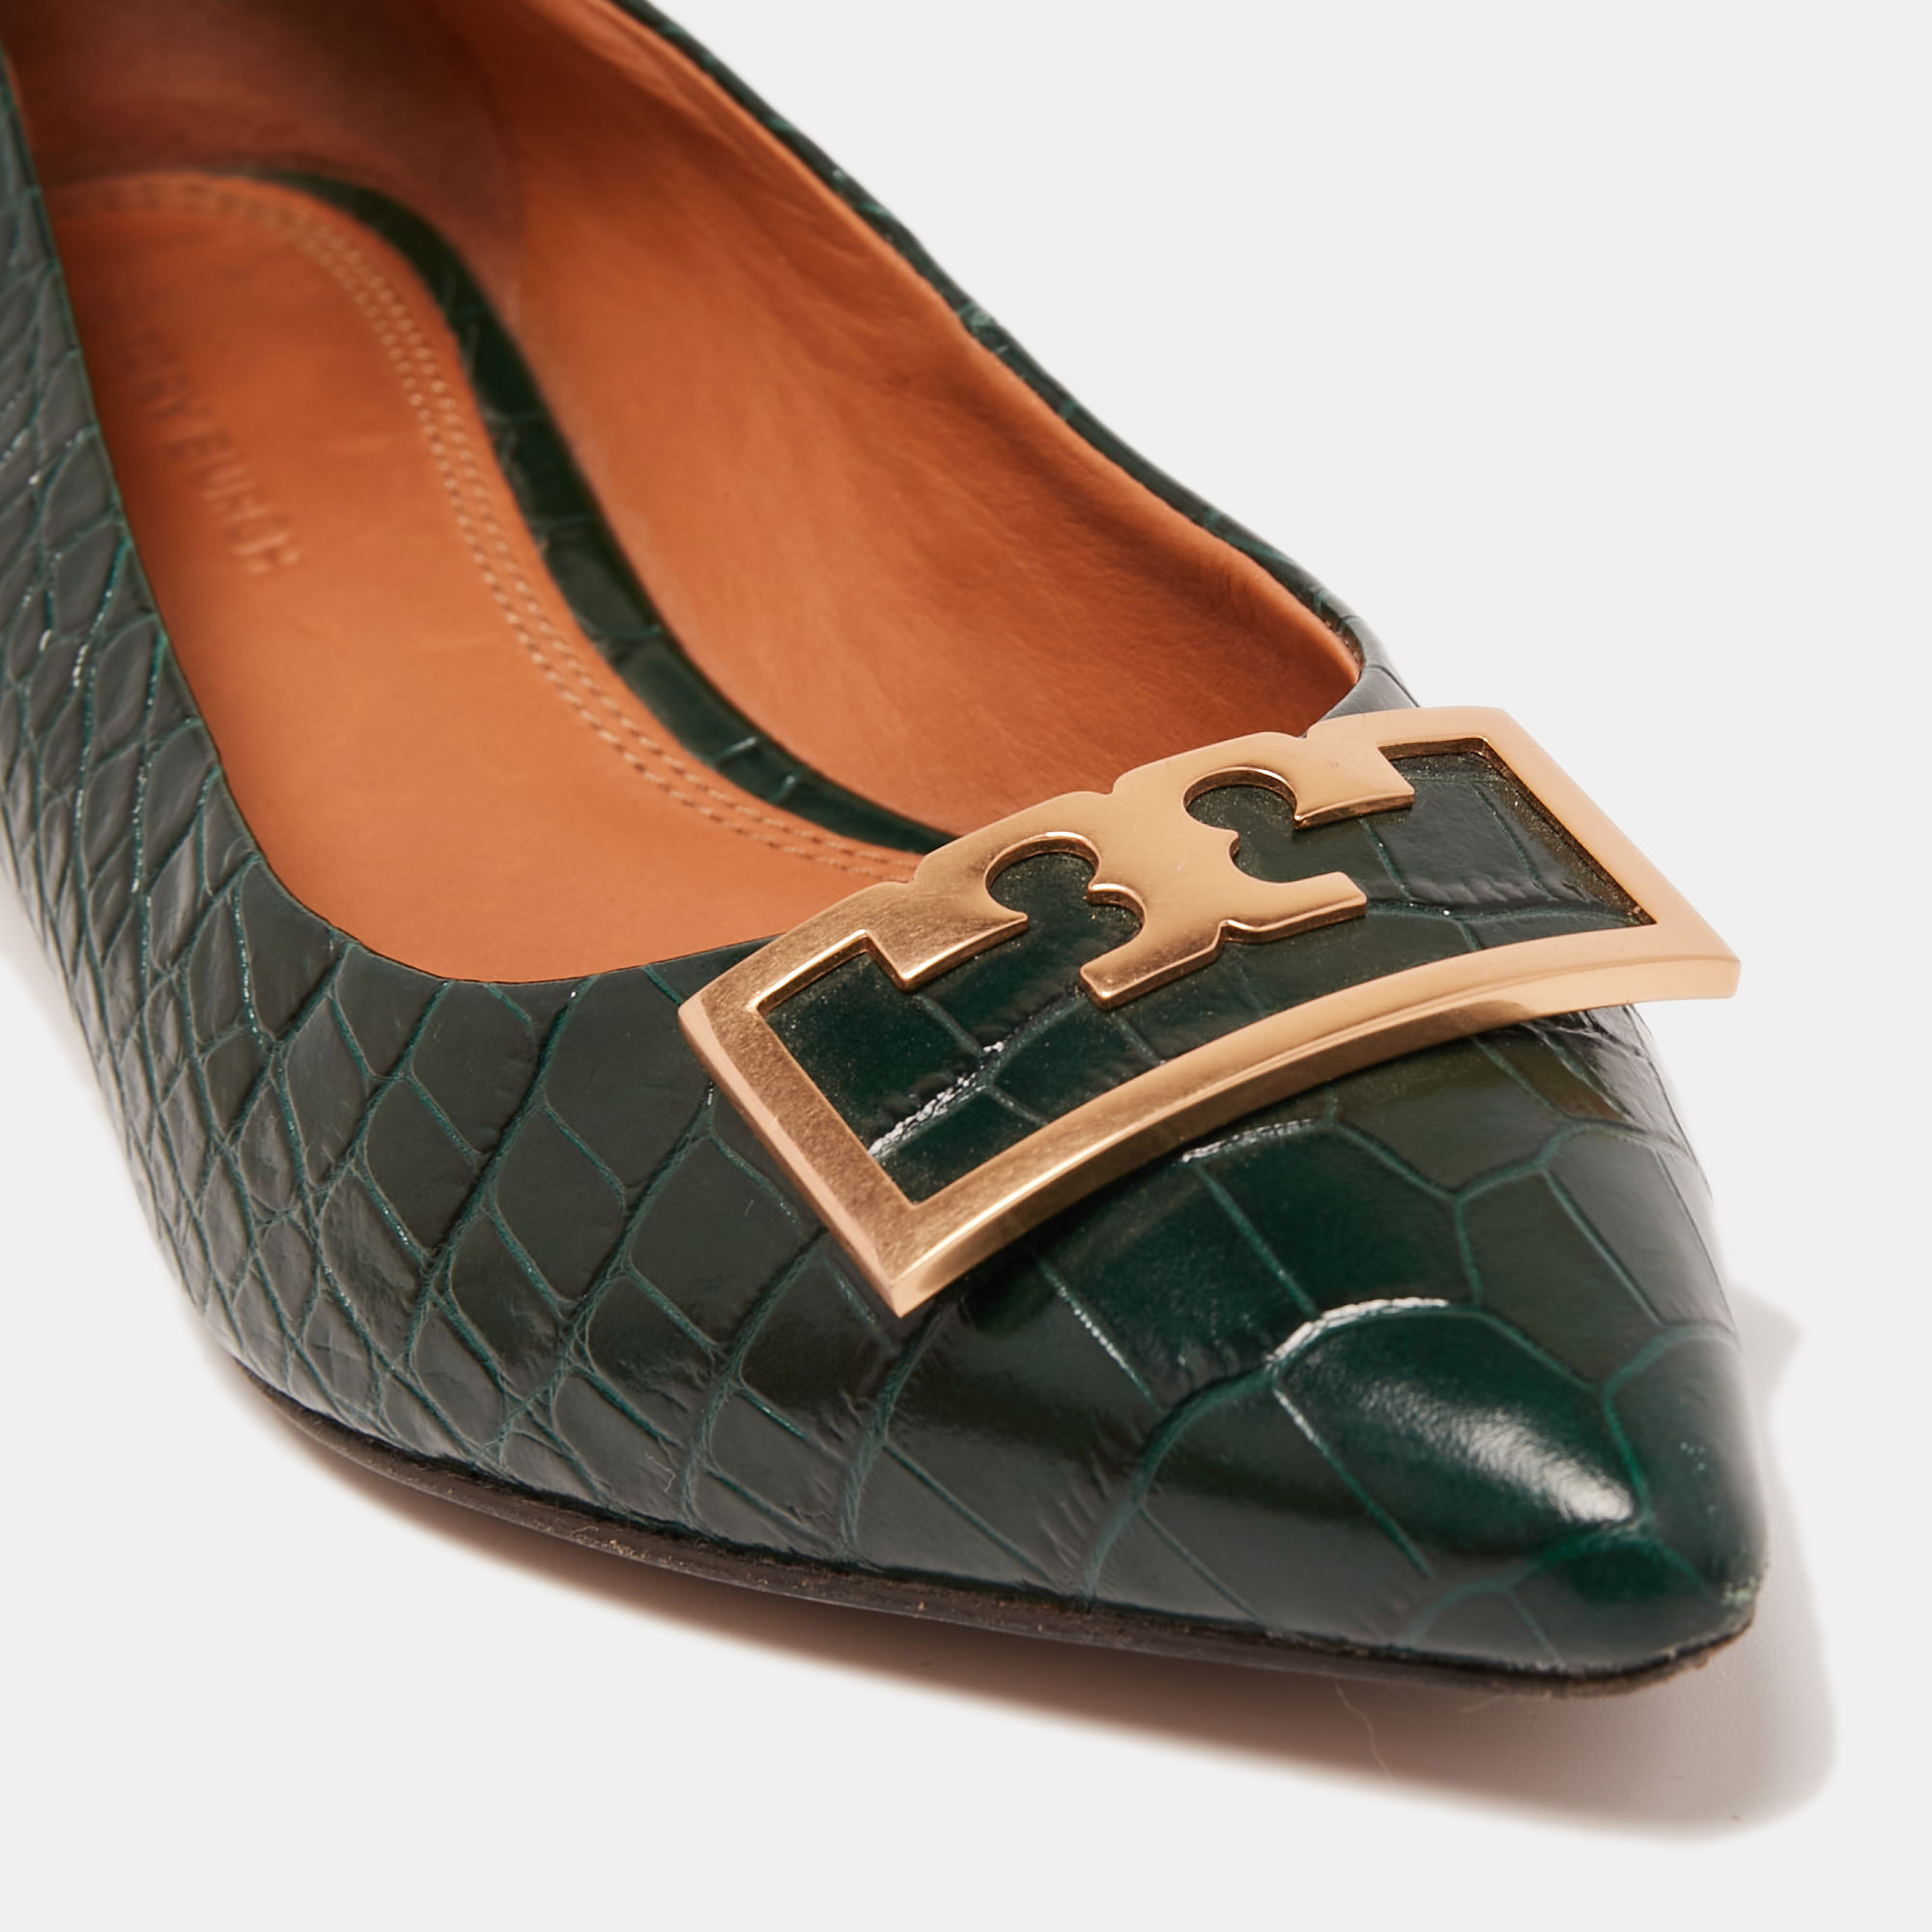 Tory Burch Green Croc Embossed Leather Pointed Toe Ballet Flats Size 36